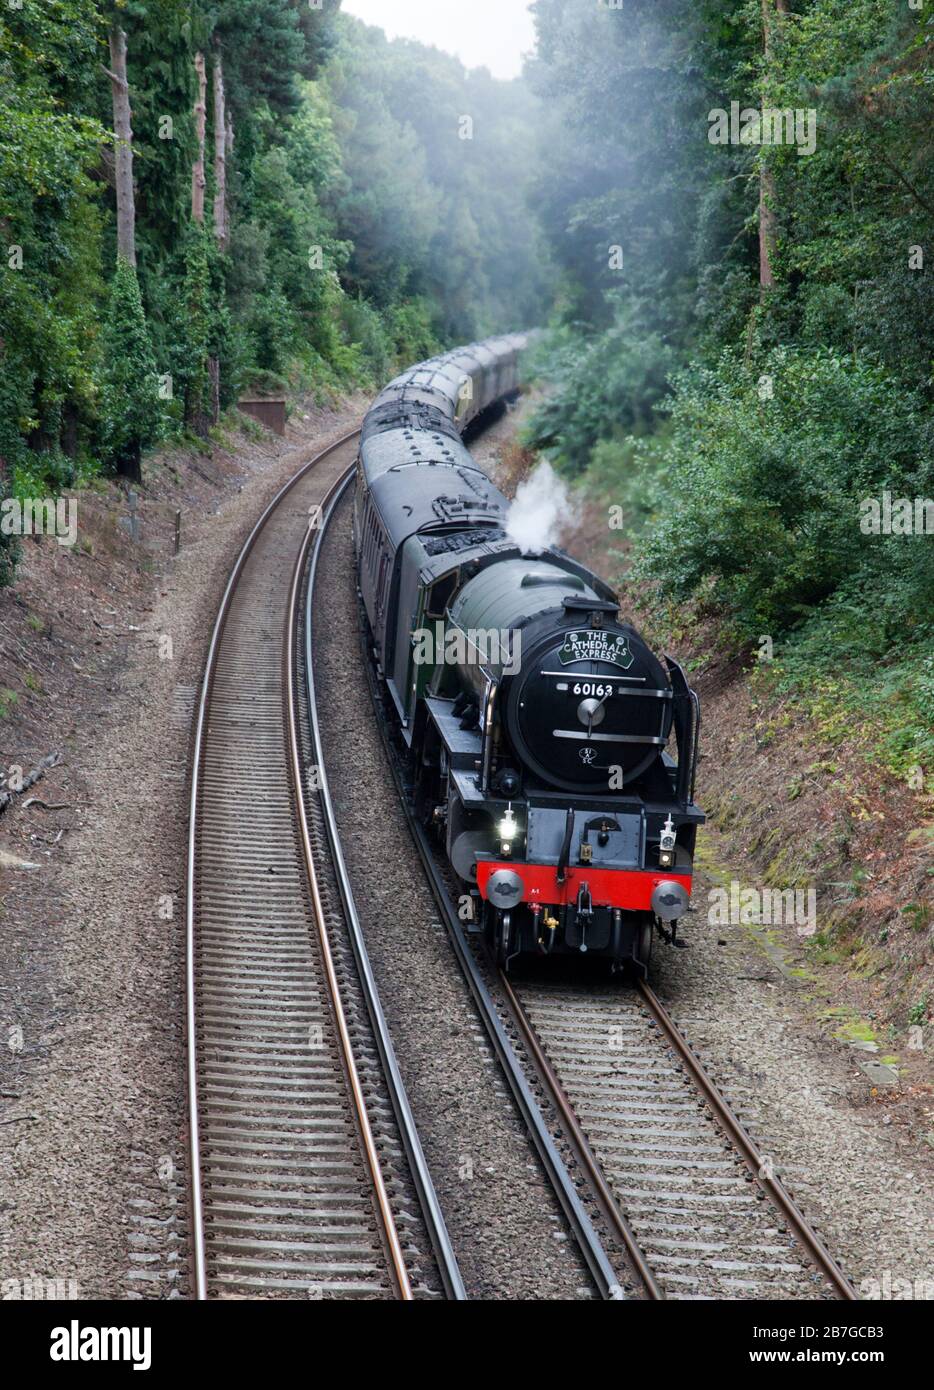 steam locomotive number 60163 Tornado pulls a special train on the mainline railway near Bournemouth, England. Stock Photo